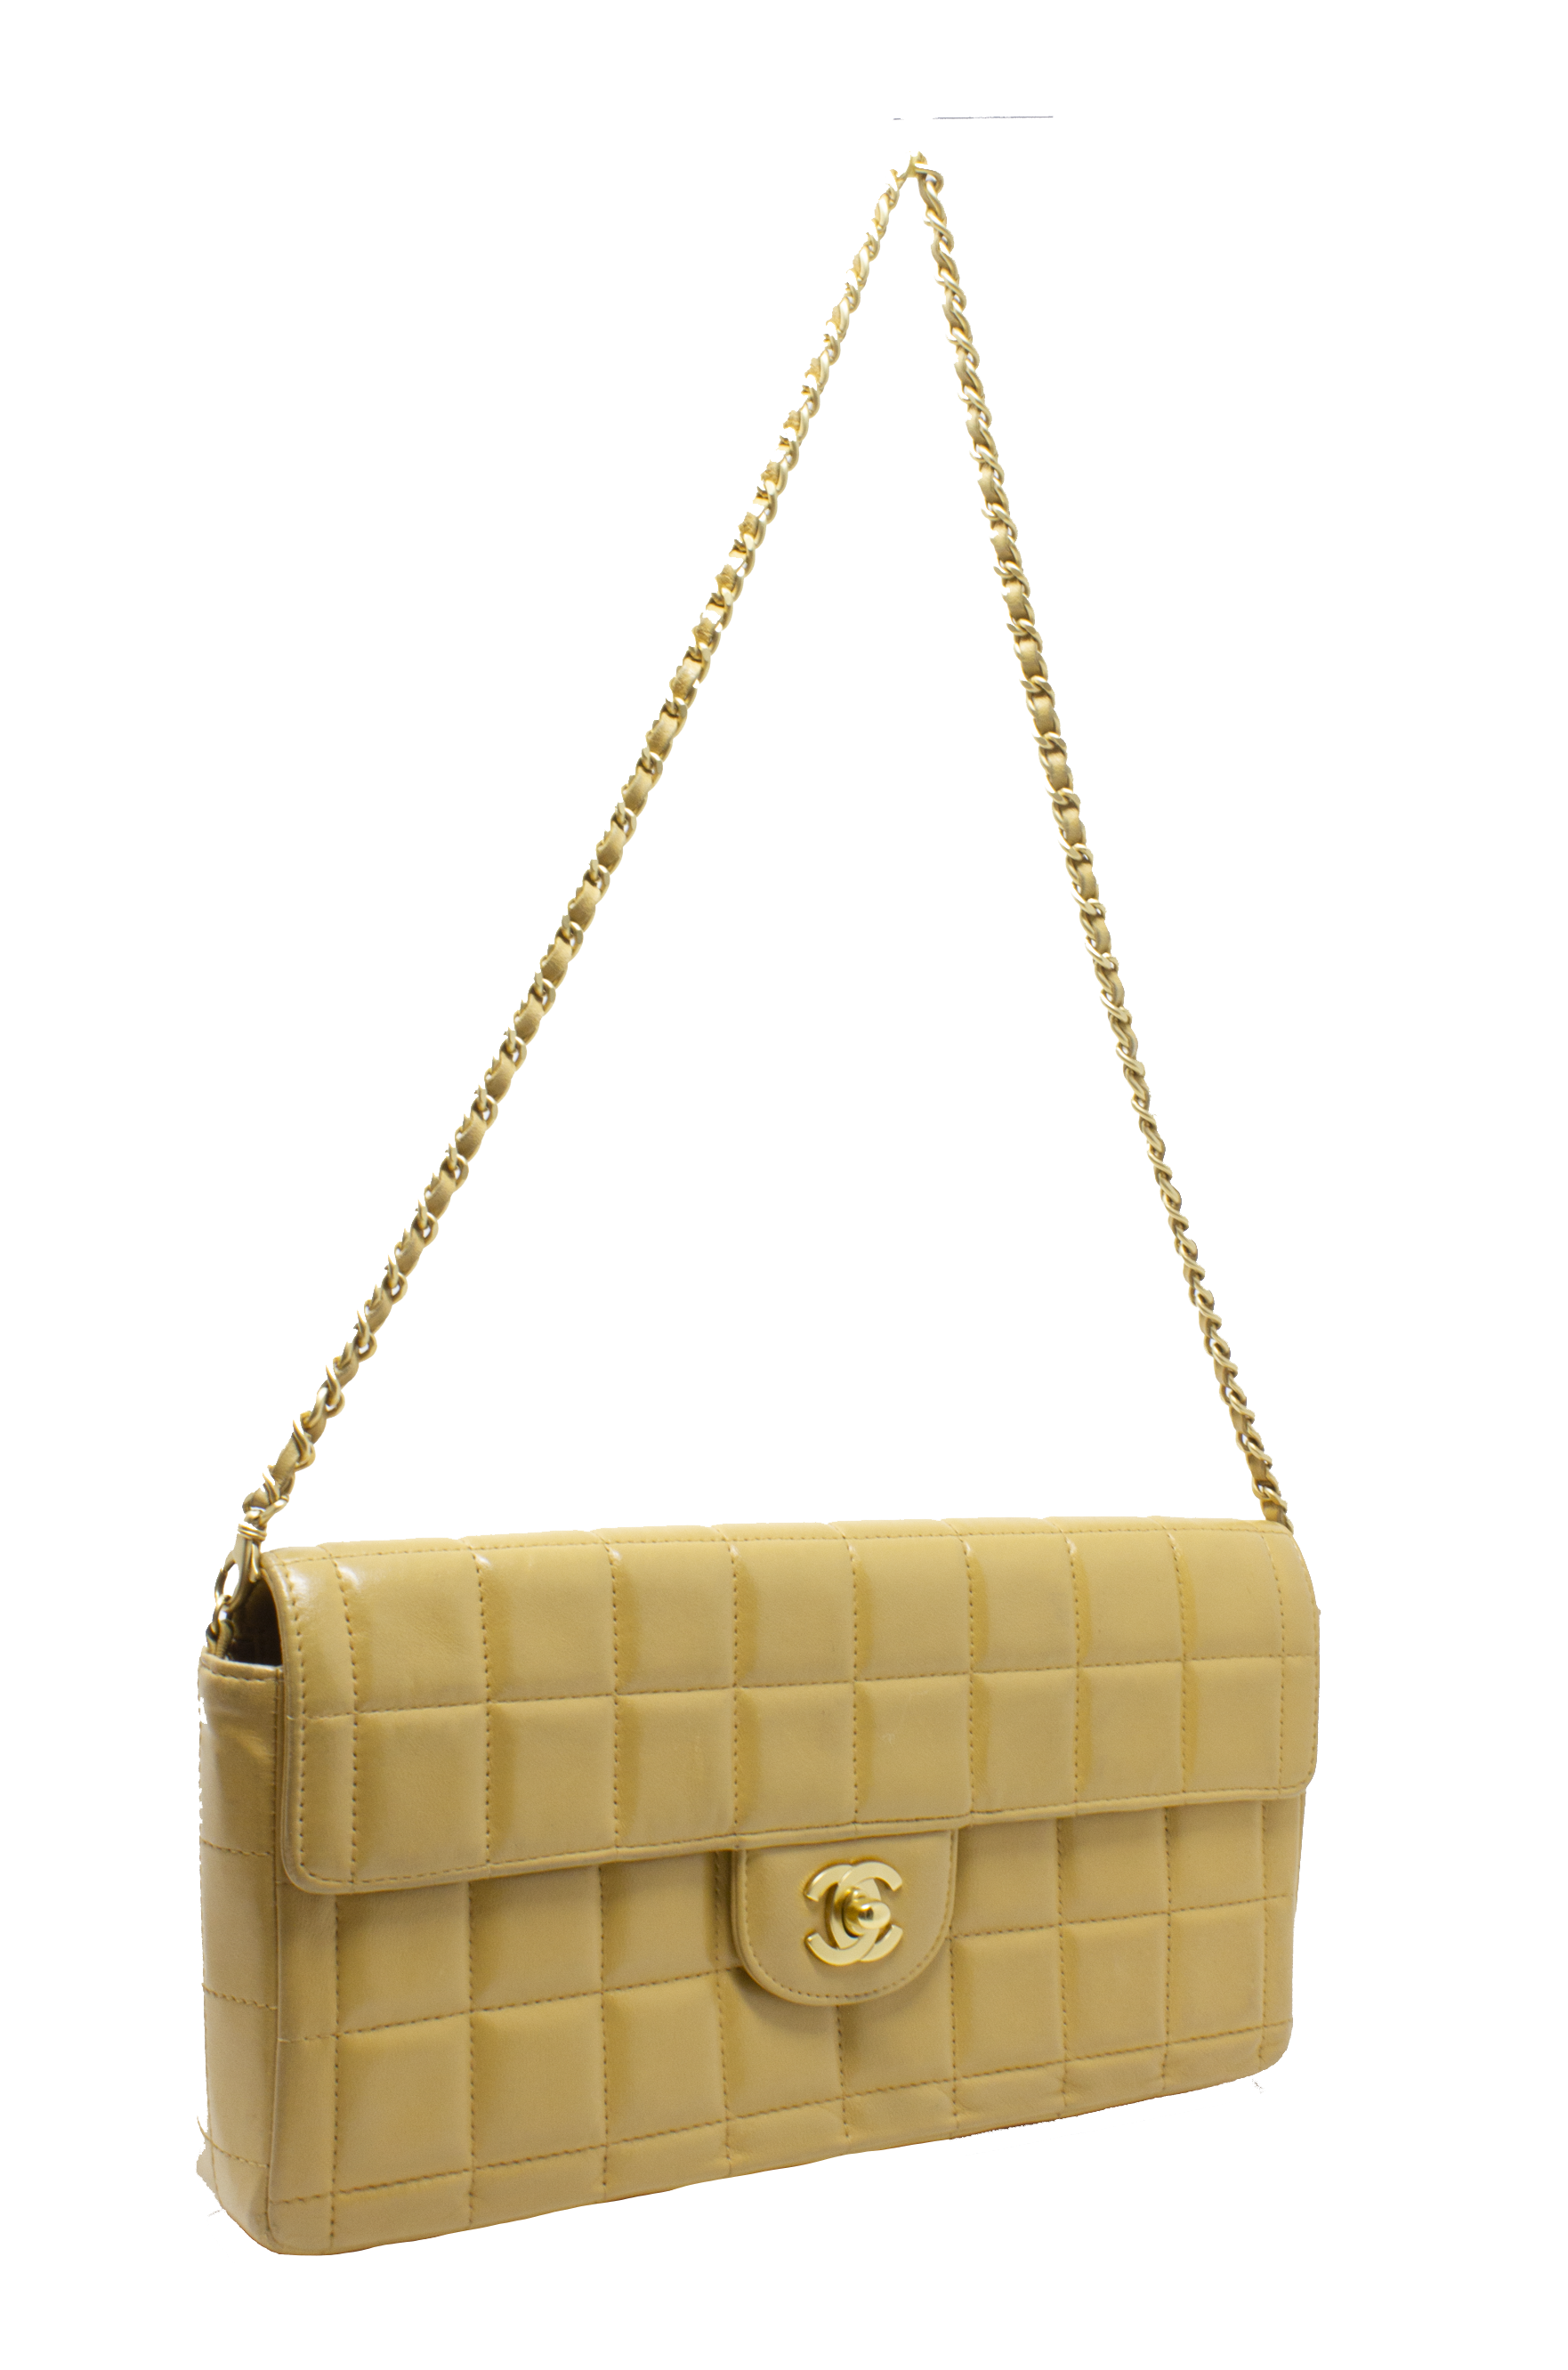 East west chocolate bar leather handbag Chanel Beige in Leather - 35734679